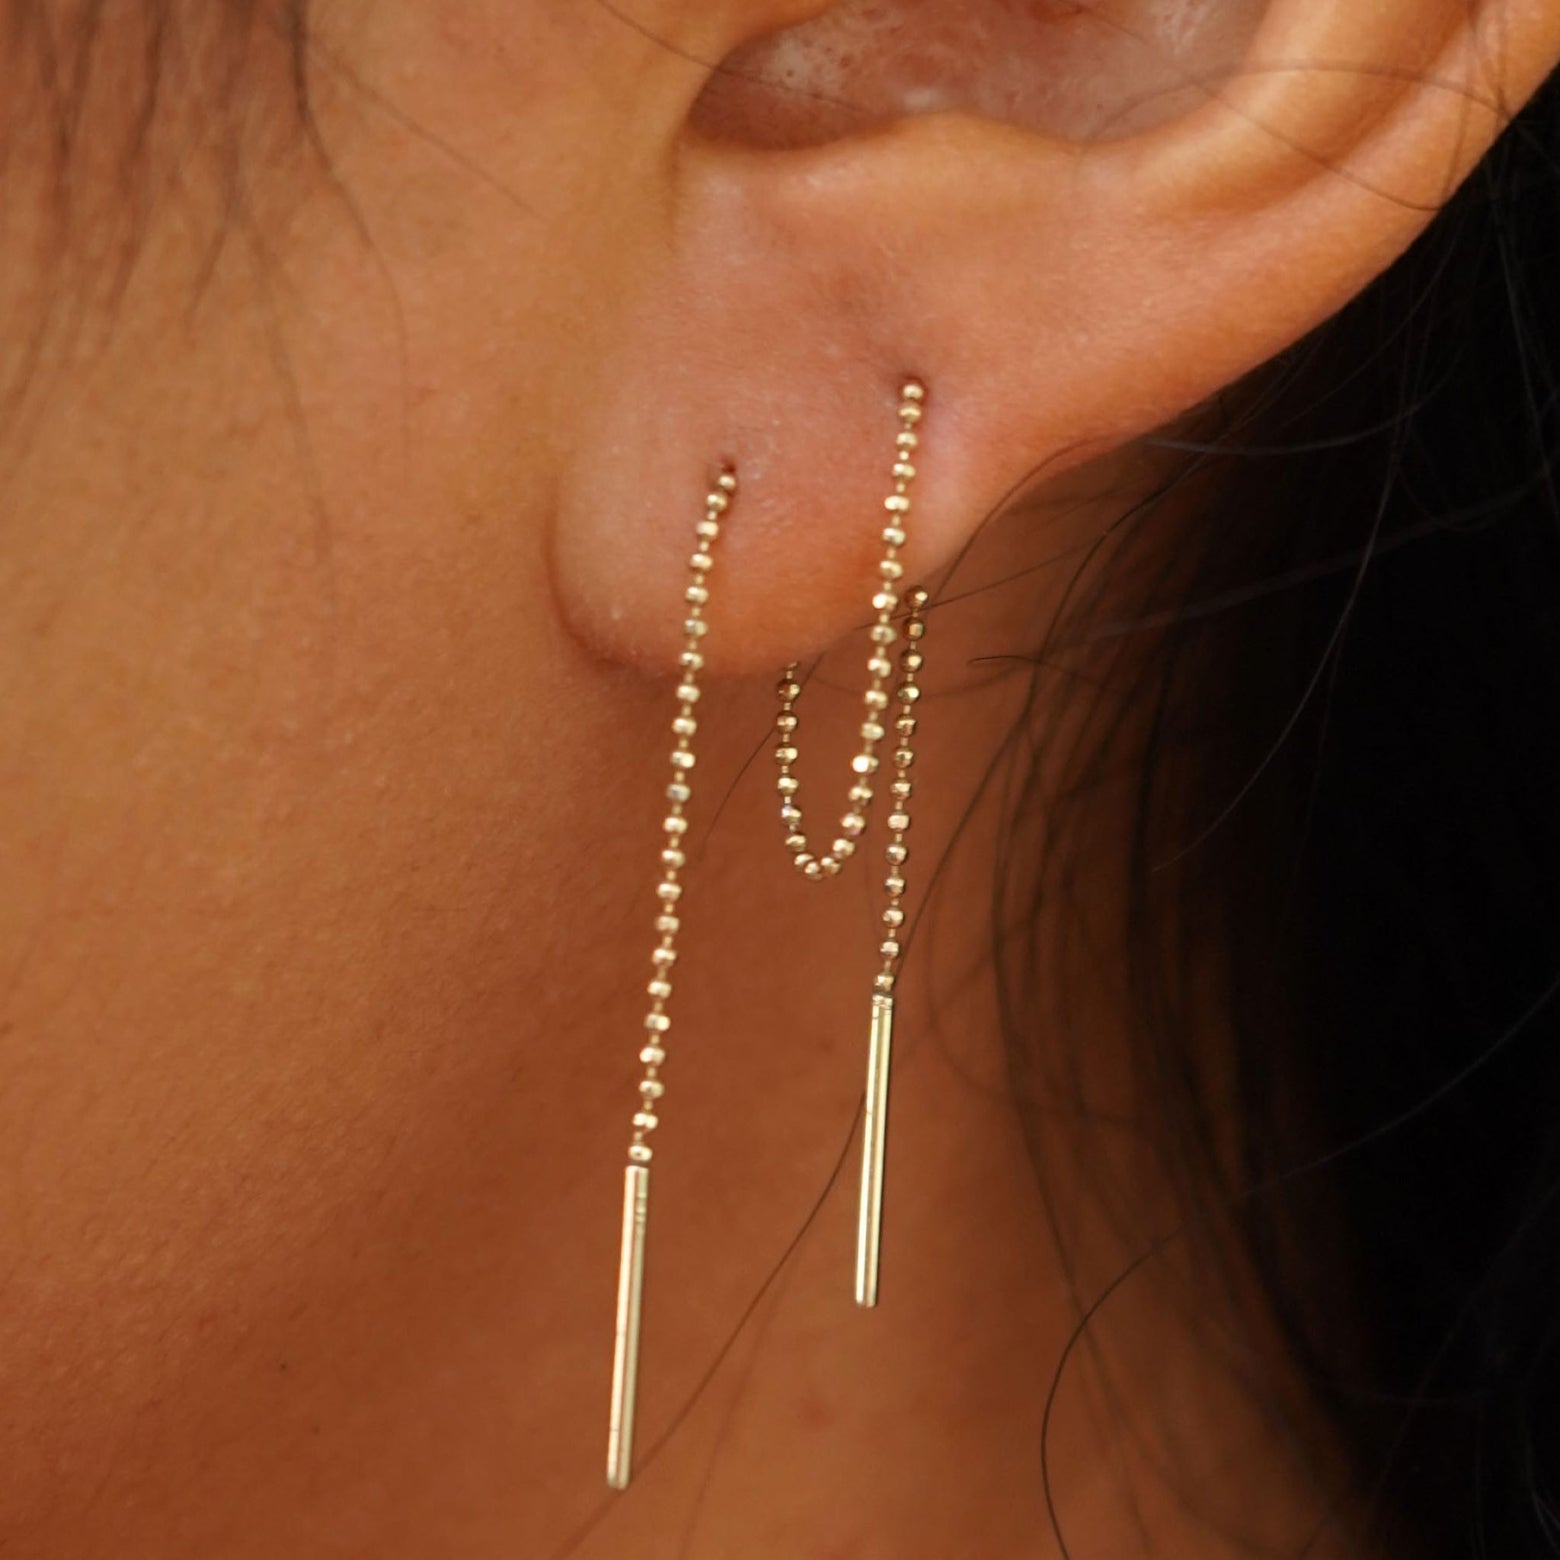 Close up view of a model's ear wearing a Threader through looped tightly in the front through two piercings and dangling